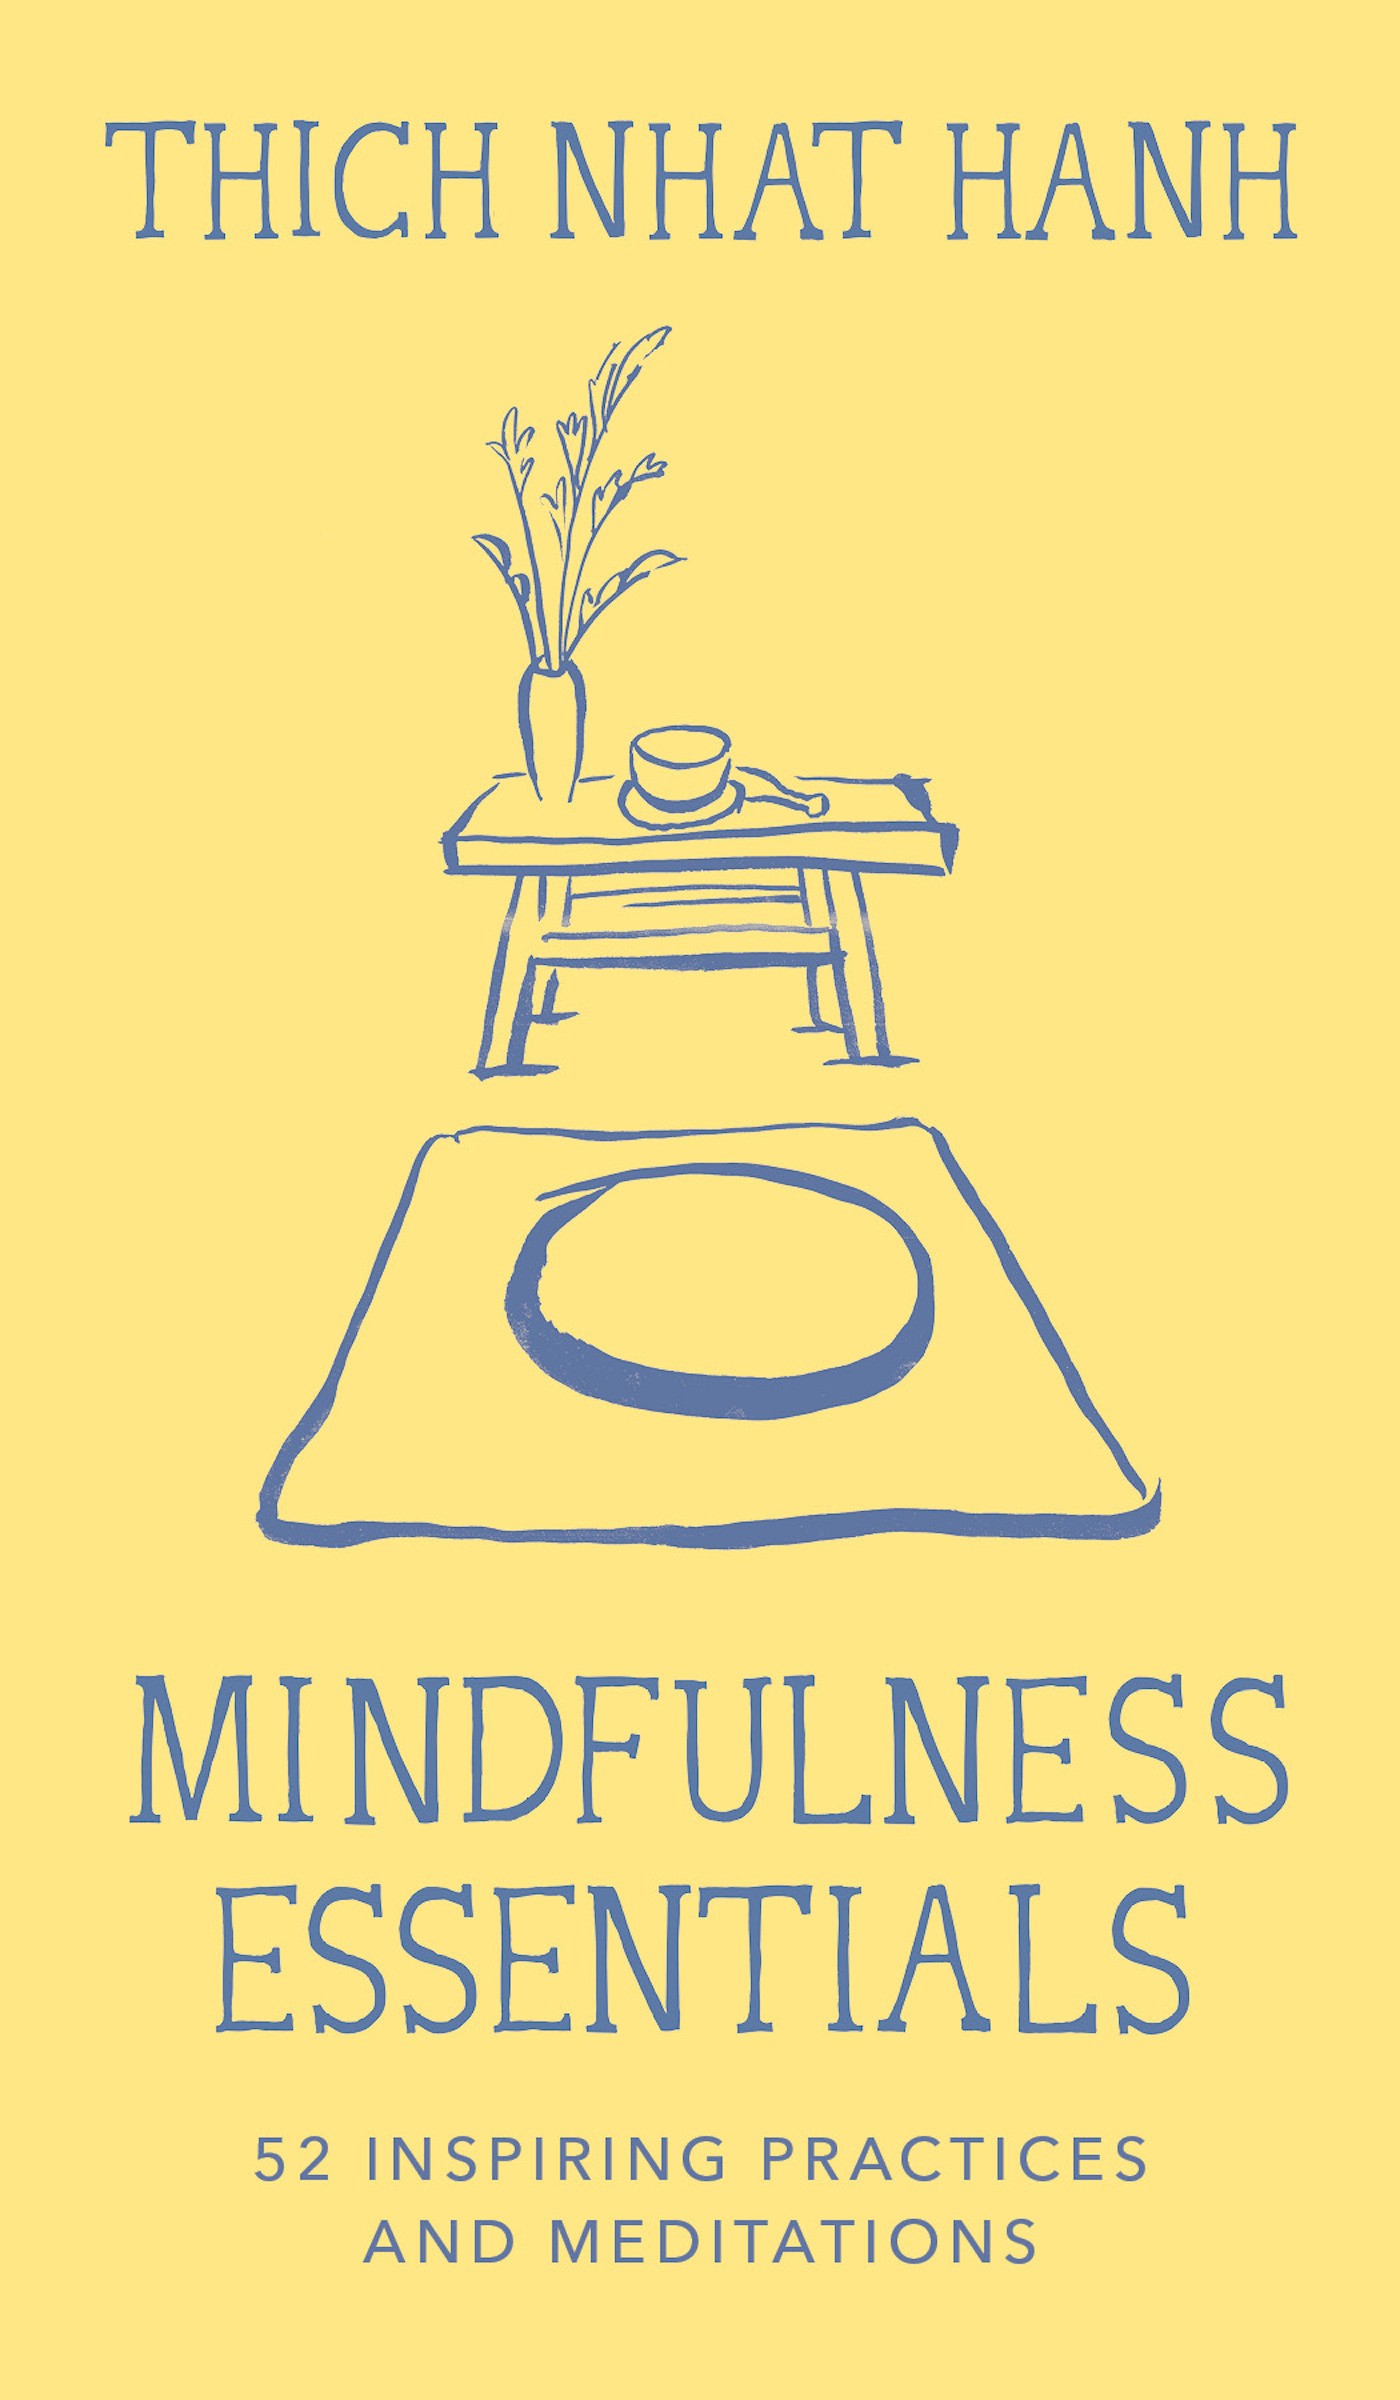 Mindfulness Essentials Cards : 52 Inspiring Practices and Meditations | Hanh, Thich Nhat (Auteur) | DeAntonis, Jason (Illustrateur)